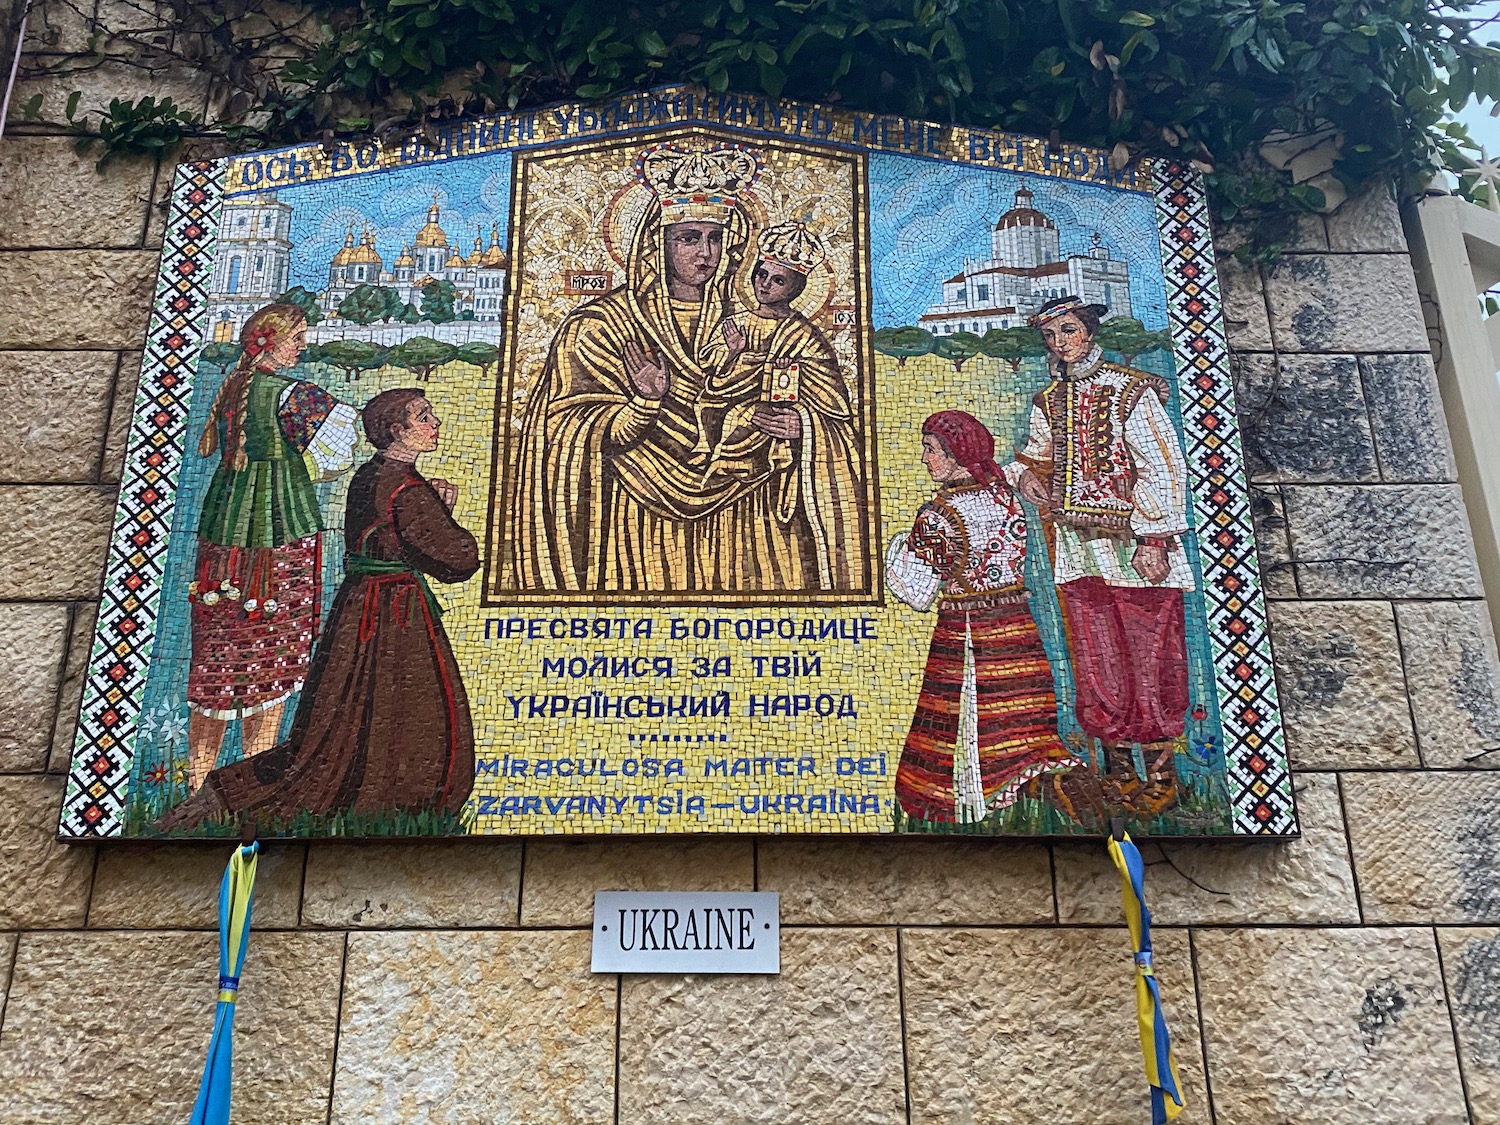 a mosaic of a woman with a child and a group of people